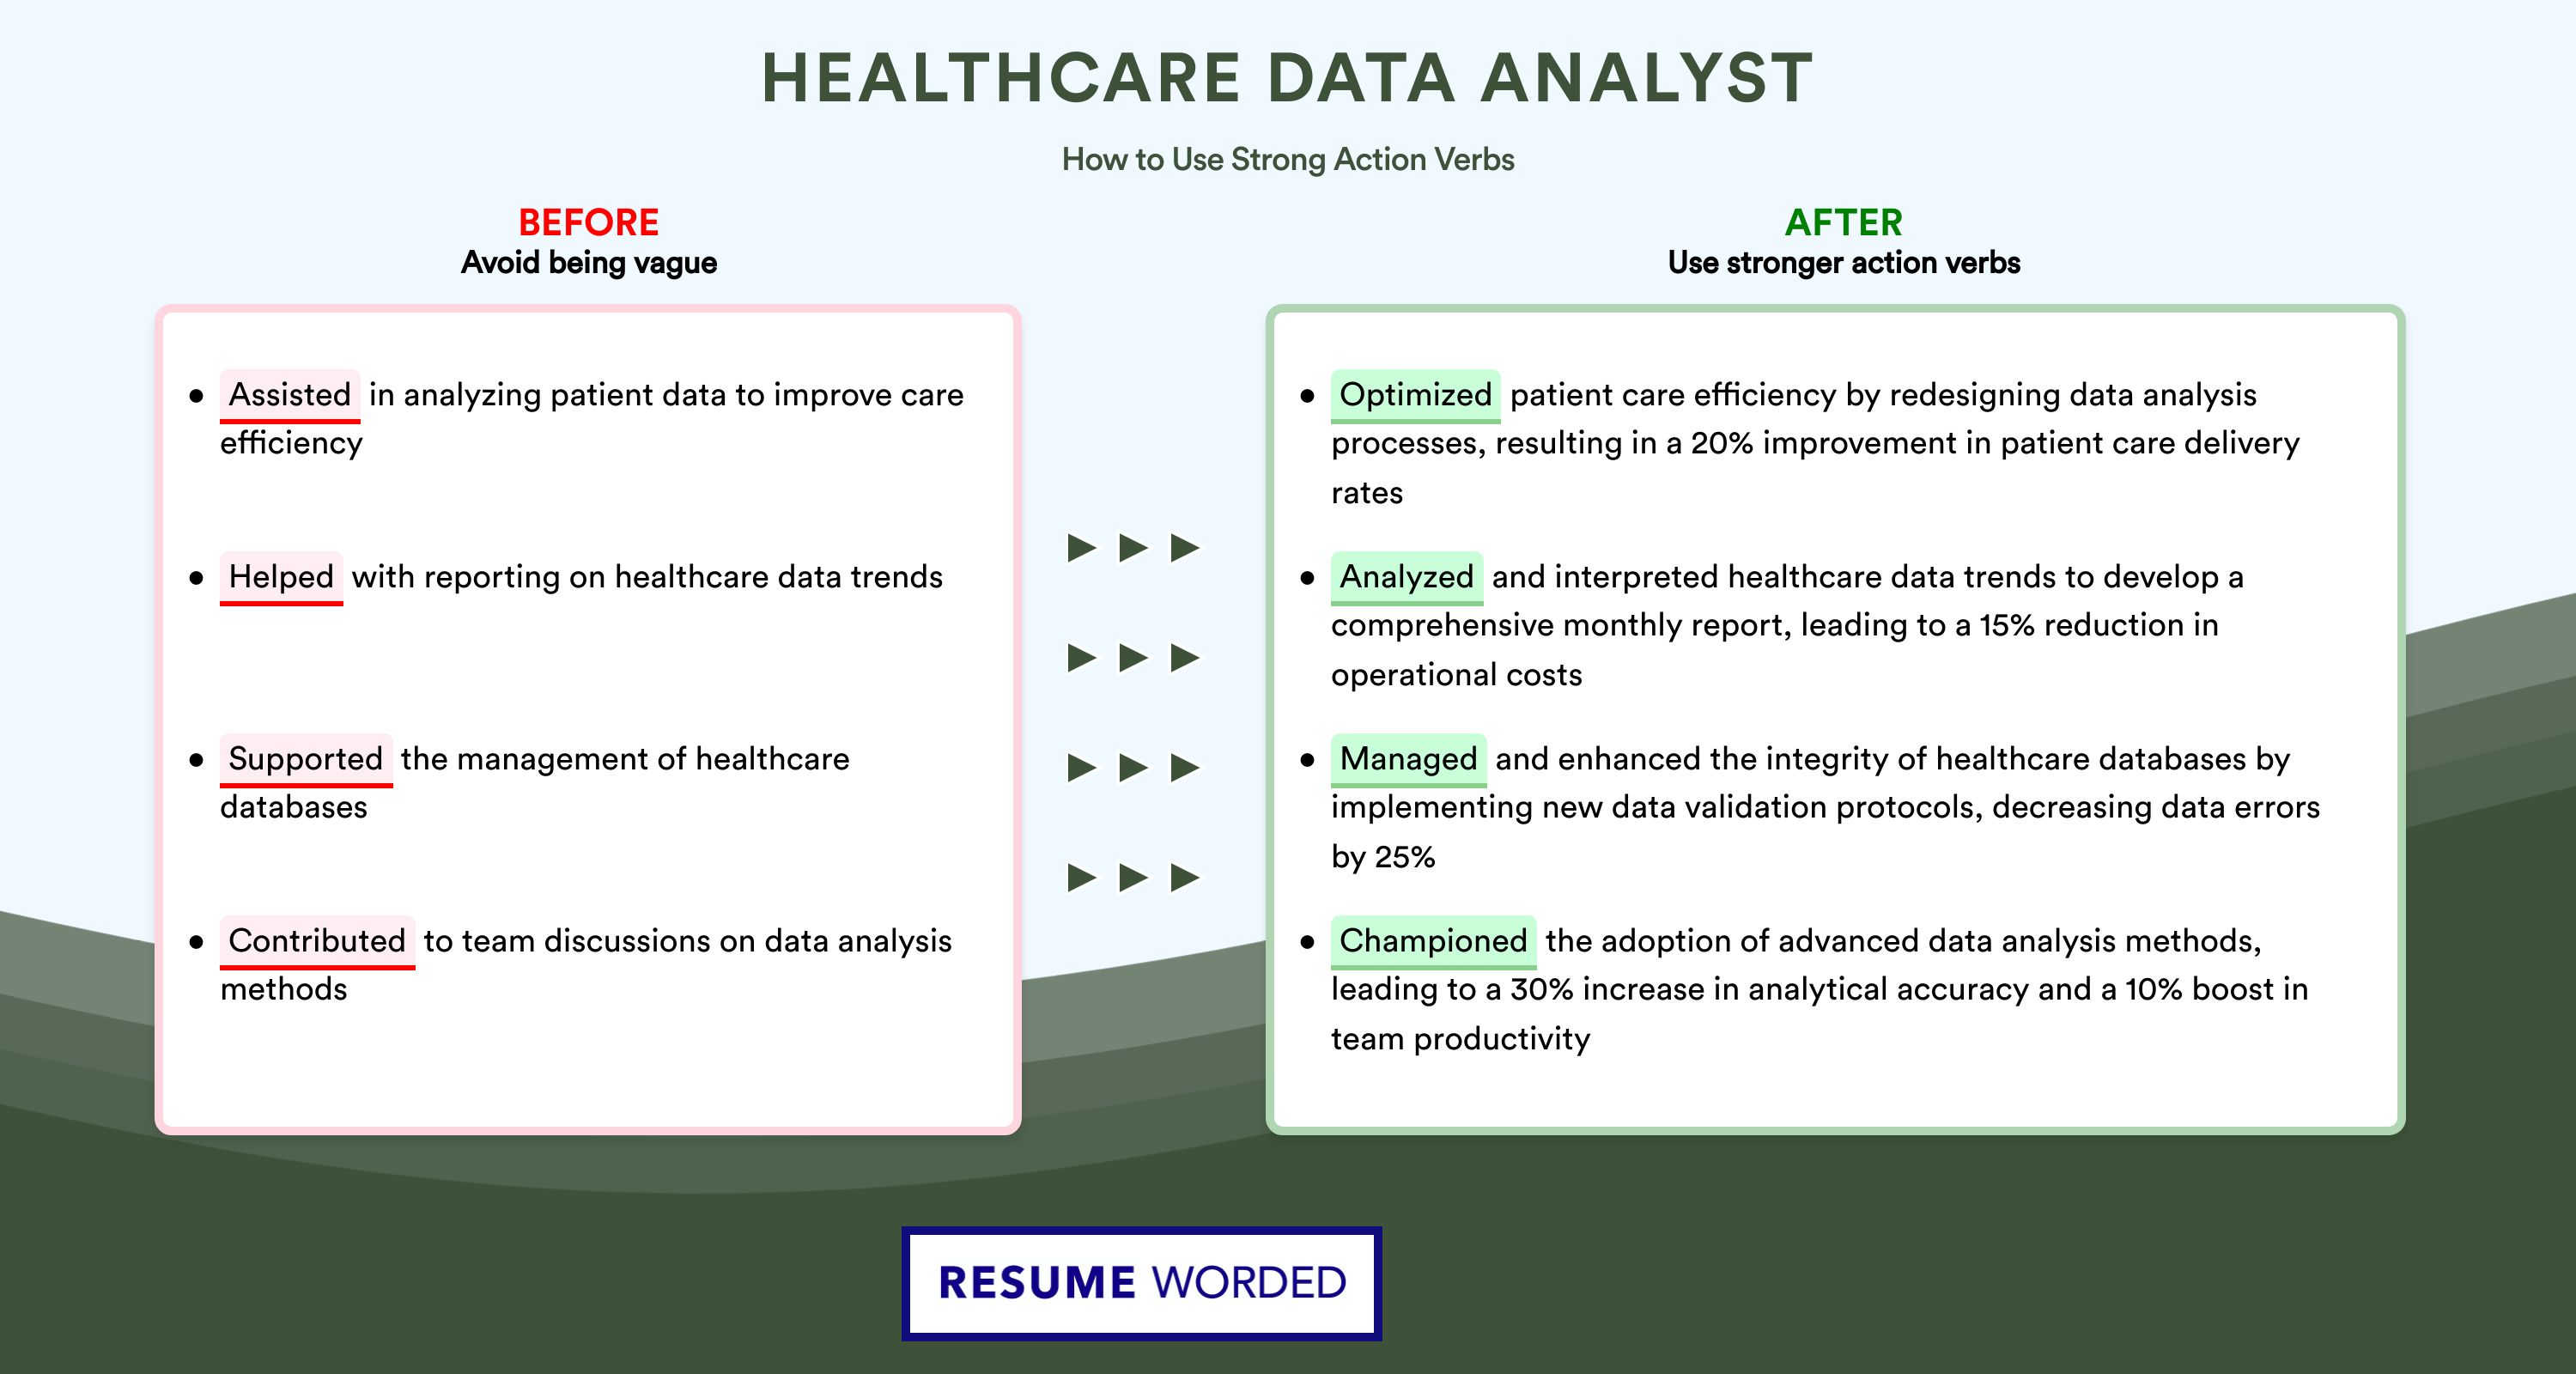 Action Verbs for Healthcare Data Analyst